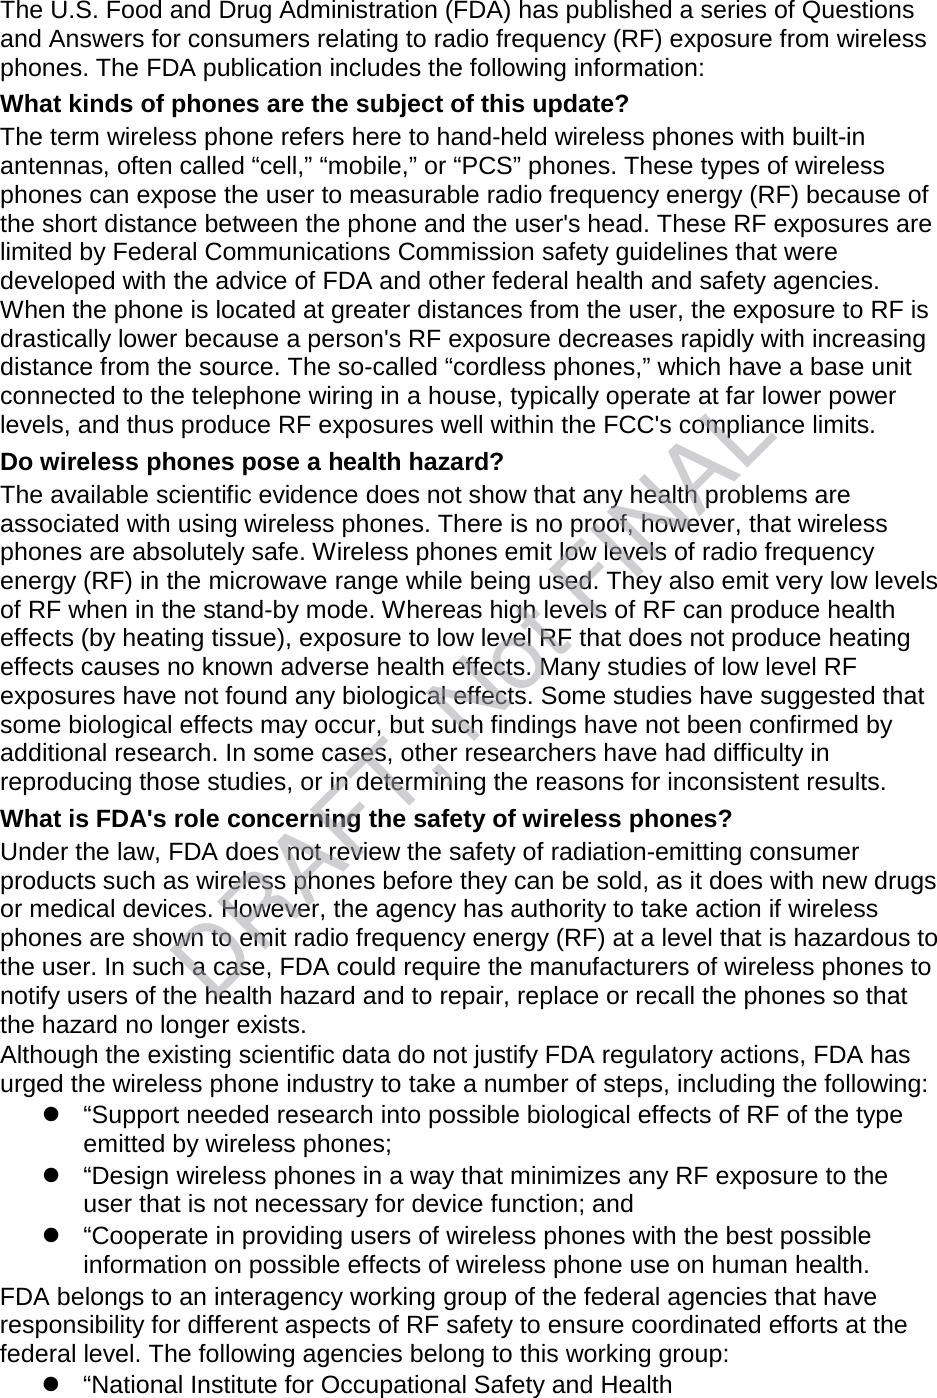 The U.S. Food and Drug Administration (FDA) has published a series of Questions and Answers for consumers relating to radio frequency (RF) exposure from wireless phones. The FDA publication includes the following information: What kinds of phones are the subject of this update? The term wireless phone refers here to hand-held wireless phones with built-in antennas, often called “cell,” “mobile,” or “PCS” phones. These types of wireless phones can expose the user to measurable radio frequency energy (RF) because of the short distance between the phone and the user&apos;s head. These RF exposures are limited by Federal Communications Commission safety guidelines that were developed with the advice of FDA and other federal health and safety agencies. When the phone is located at greater distances from the user, the exposure to RF is drastically lower because a person&apos;s RF exposure decreases rapidly with increasing distance from the source. The so-called “cordless phones,” which have a base unit connected to the telephone wiring in a house, typically operate at far lower power levels, and thus produce RF exposures well within the FCC&apos;s compliance limits. Do wireless phones pose a health hazard? The available scientific evidence does not show that any health problems are associated with using wireless phones. There is no proof, however, that wireless phones are absolutely safe. Wireless phones emit low levels of radio frequency energy (RF) in the microwave range while being used. They also emit very low levels of RF when in the stand-by mode. Whereas high levels of RF can produce health effects (by heating tissue), exposure to low level RF that does not produce heating effects causes no known adverse health effects. Many studies of low level RF exposures have not found any biological effects. Some studies have suggested that some biological effects may occur, but such findings have not been confirmed by additional research. In some cases, other researchers have had difficulty in reproducing those studies, or in determining the reasons for inconsistent results. What is FDA&apos;s role concerning the safety of wireless phones? Under the law, FDA does not review the safety of radiation-emitting consumer products such as wireless phones before they can be sold, as it does with new drugs or medical devices. However, the agency has authority to take action if wireless phones are shown to emit radio frequency energy (RF) at a level that is hazardous to the user. In such a case, FDA could require the manufacturers of wireless phones to notify users of the health hazard and to repair, replace or recall the phones so that the hazard no longer exists. Although the existing scientific data do not justify FDA regulatory actions, FDA has urged the wireless phone industry to take a number of steps, including the following:  “Support needed research into possible biological effects of RF of the type emitted by wireless phones;  “Design wireless phones in a way that minimizes any RF exposure to the user that is not necessary for device function; and  “Cooperate in providing users of wireless phones with the best possible information on possible effects of wireless phone use on human health. FDA belongs to an interagency working group of the federal agencies that have responsibility for different aspects of RF safety to ensure coordinated efforts at the federal level. The following agencies belong to this working group:  “National Institute for Occupational Safety and Health DRAFT, Not FINAL